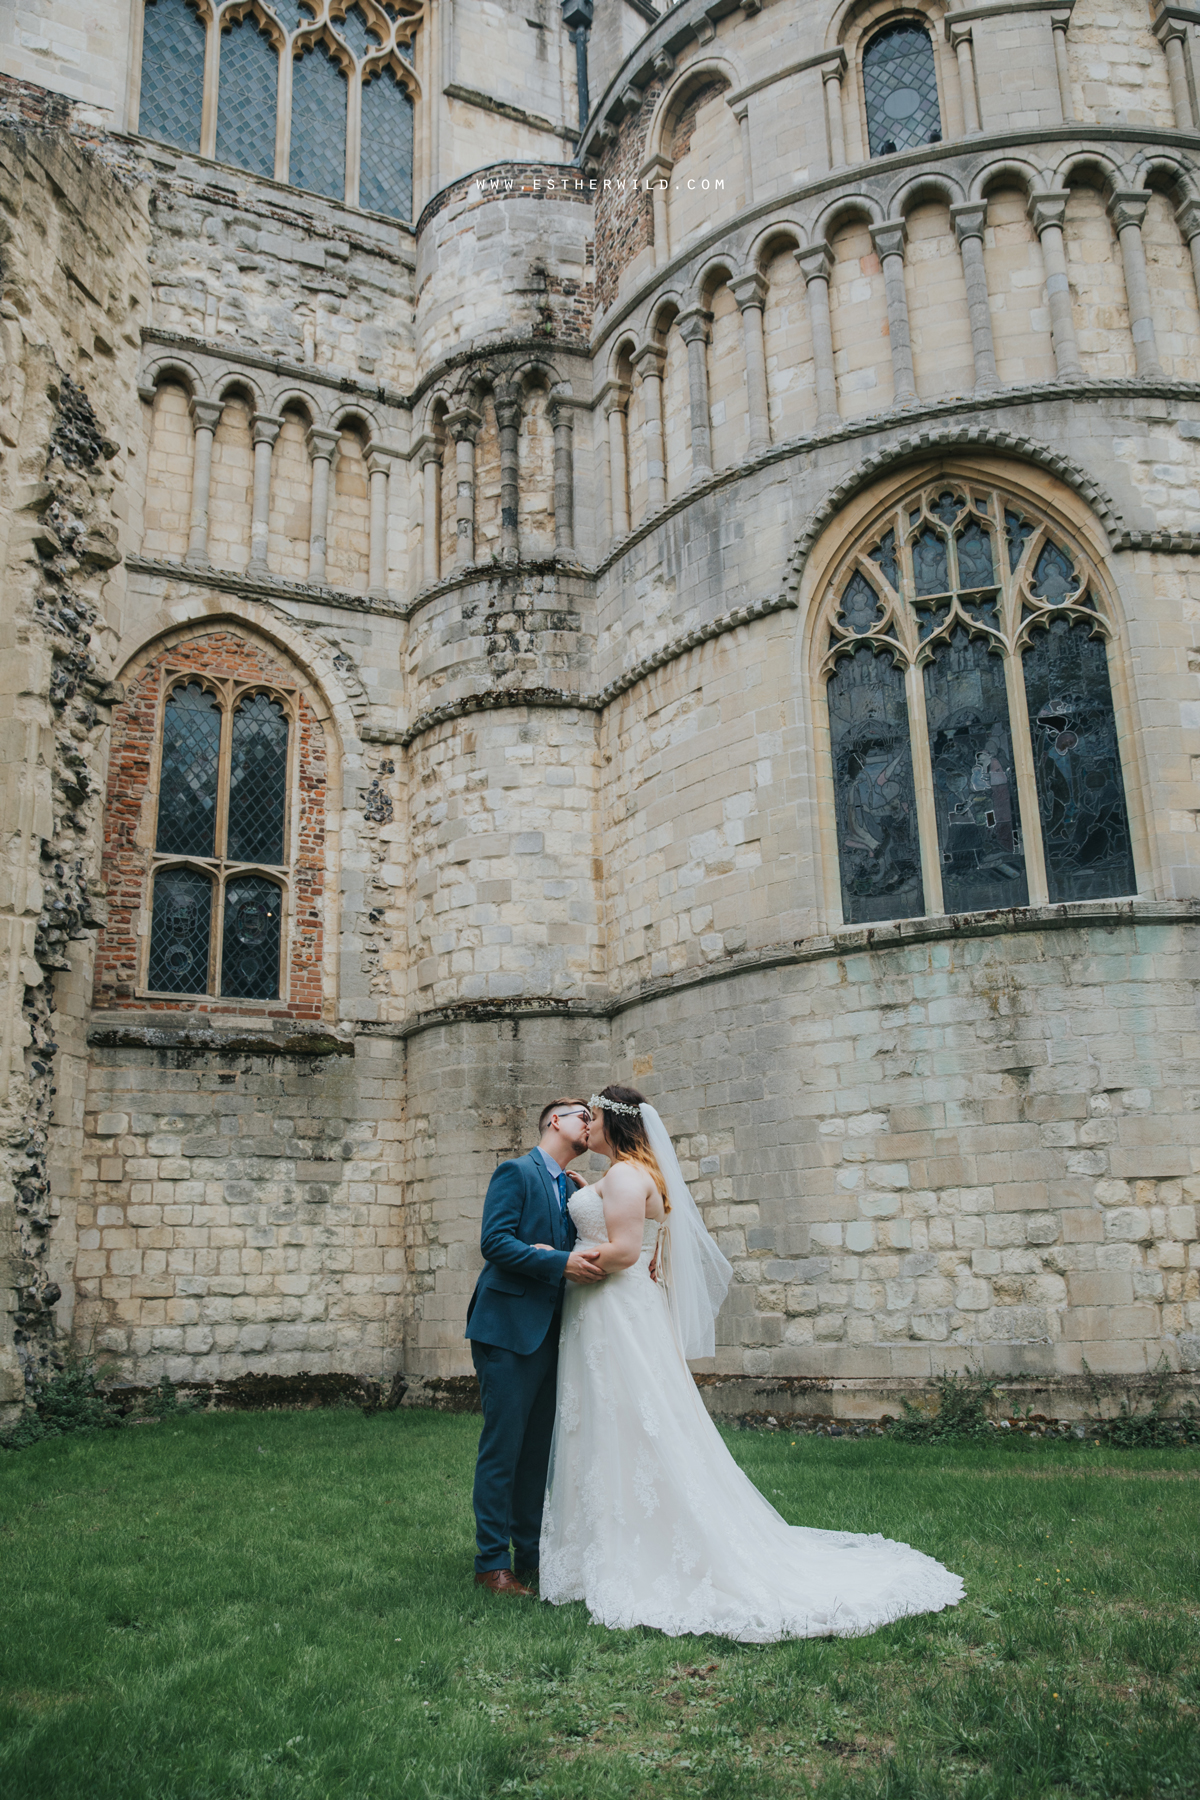 Norwich_Castle_Arcade_Grosvenor_Chip_Birdcage_Cathedral_Cloisters_Refectory_Wedding_Photography_Esther_Wild_Photographer_Norfolk_Kings_Lynn_3R8A1899.jpg